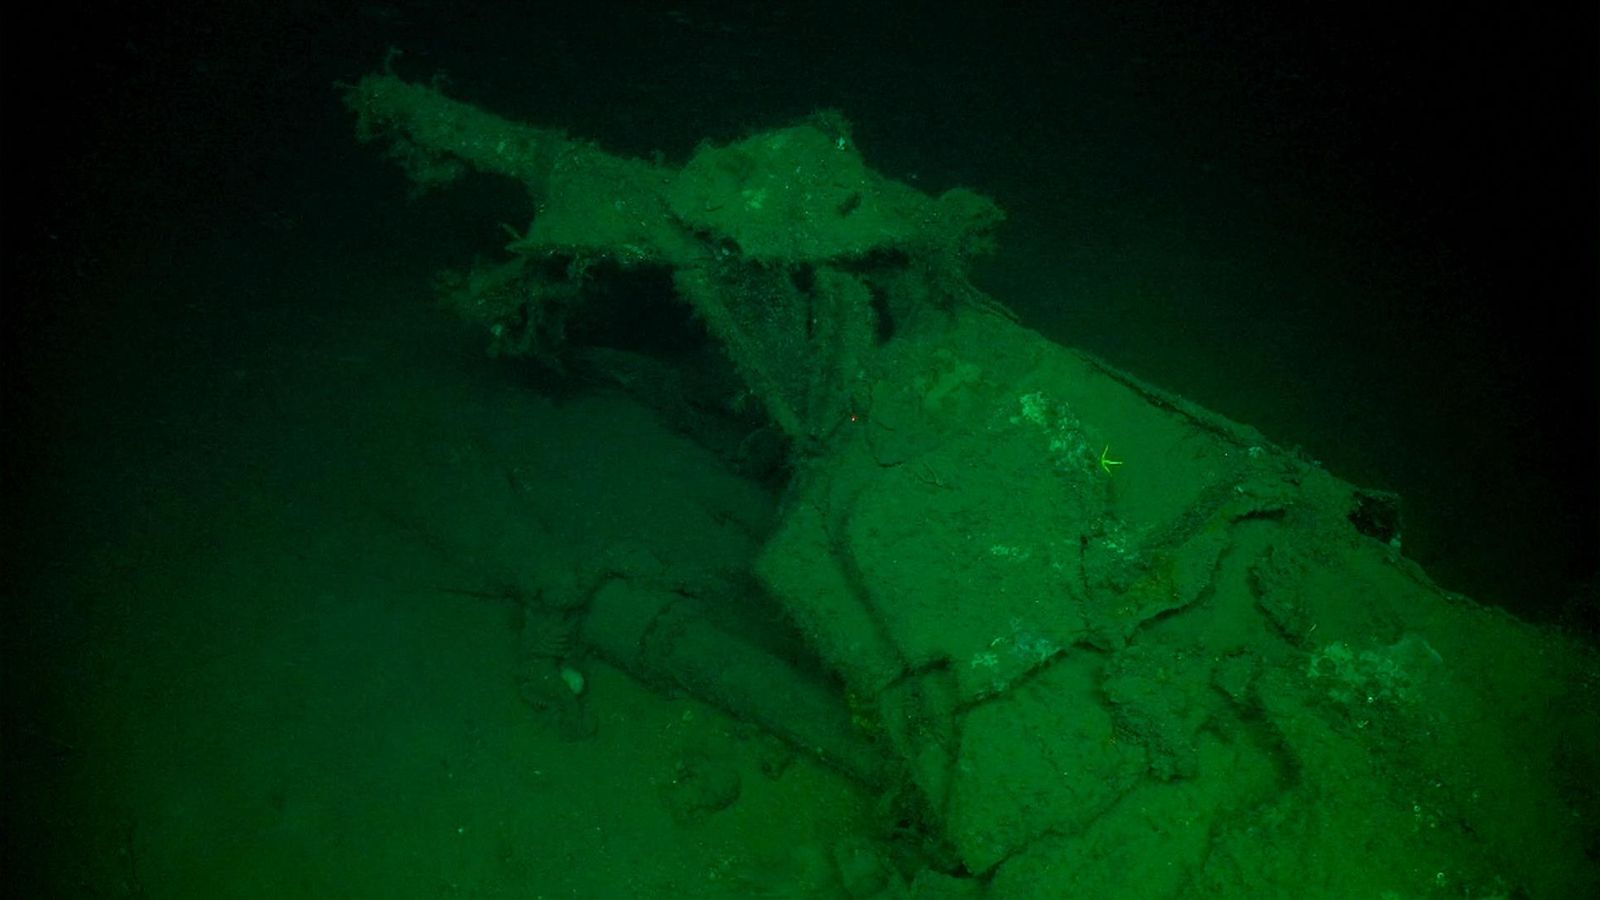 Wreck of British WWII submarine HMS Thistle found near Norway after 83 years  | World News | Sky News